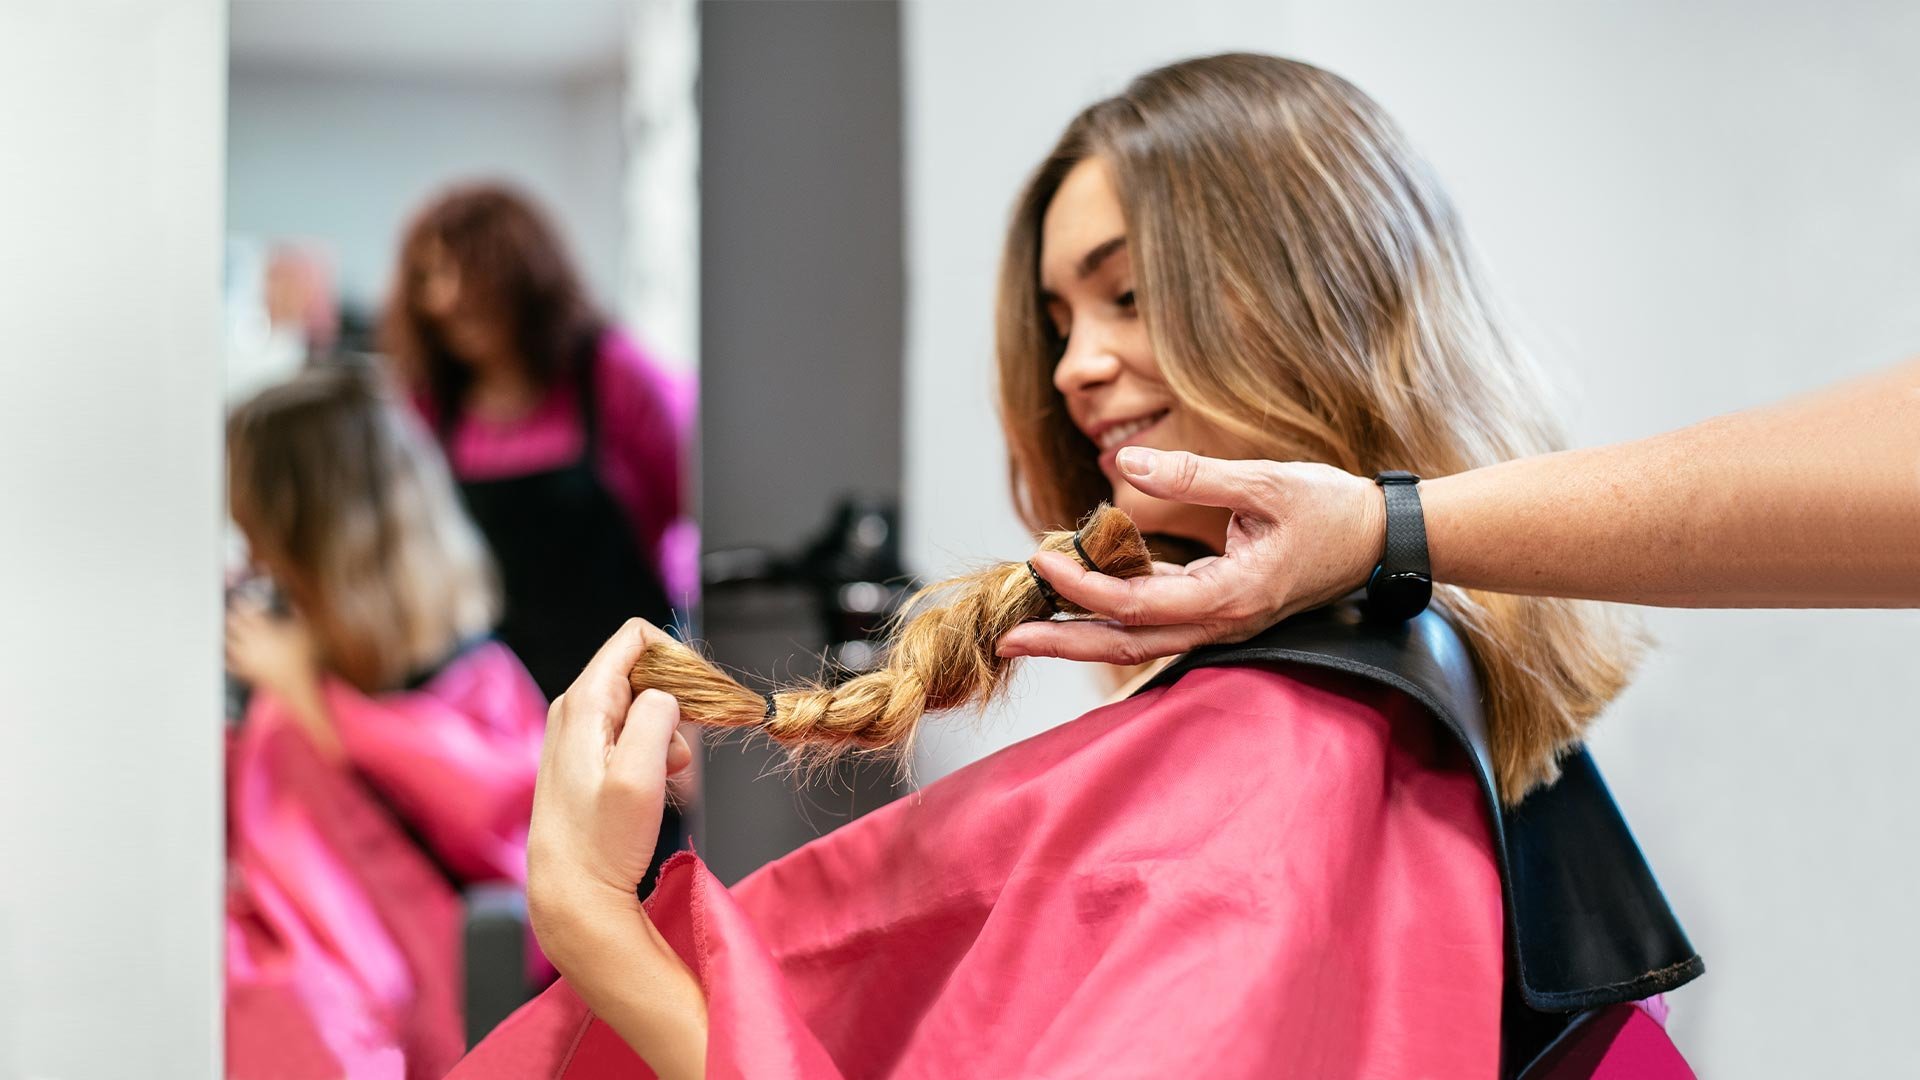 Hair Donation 101: Here's What You Need to Know - L'Oréal Paris